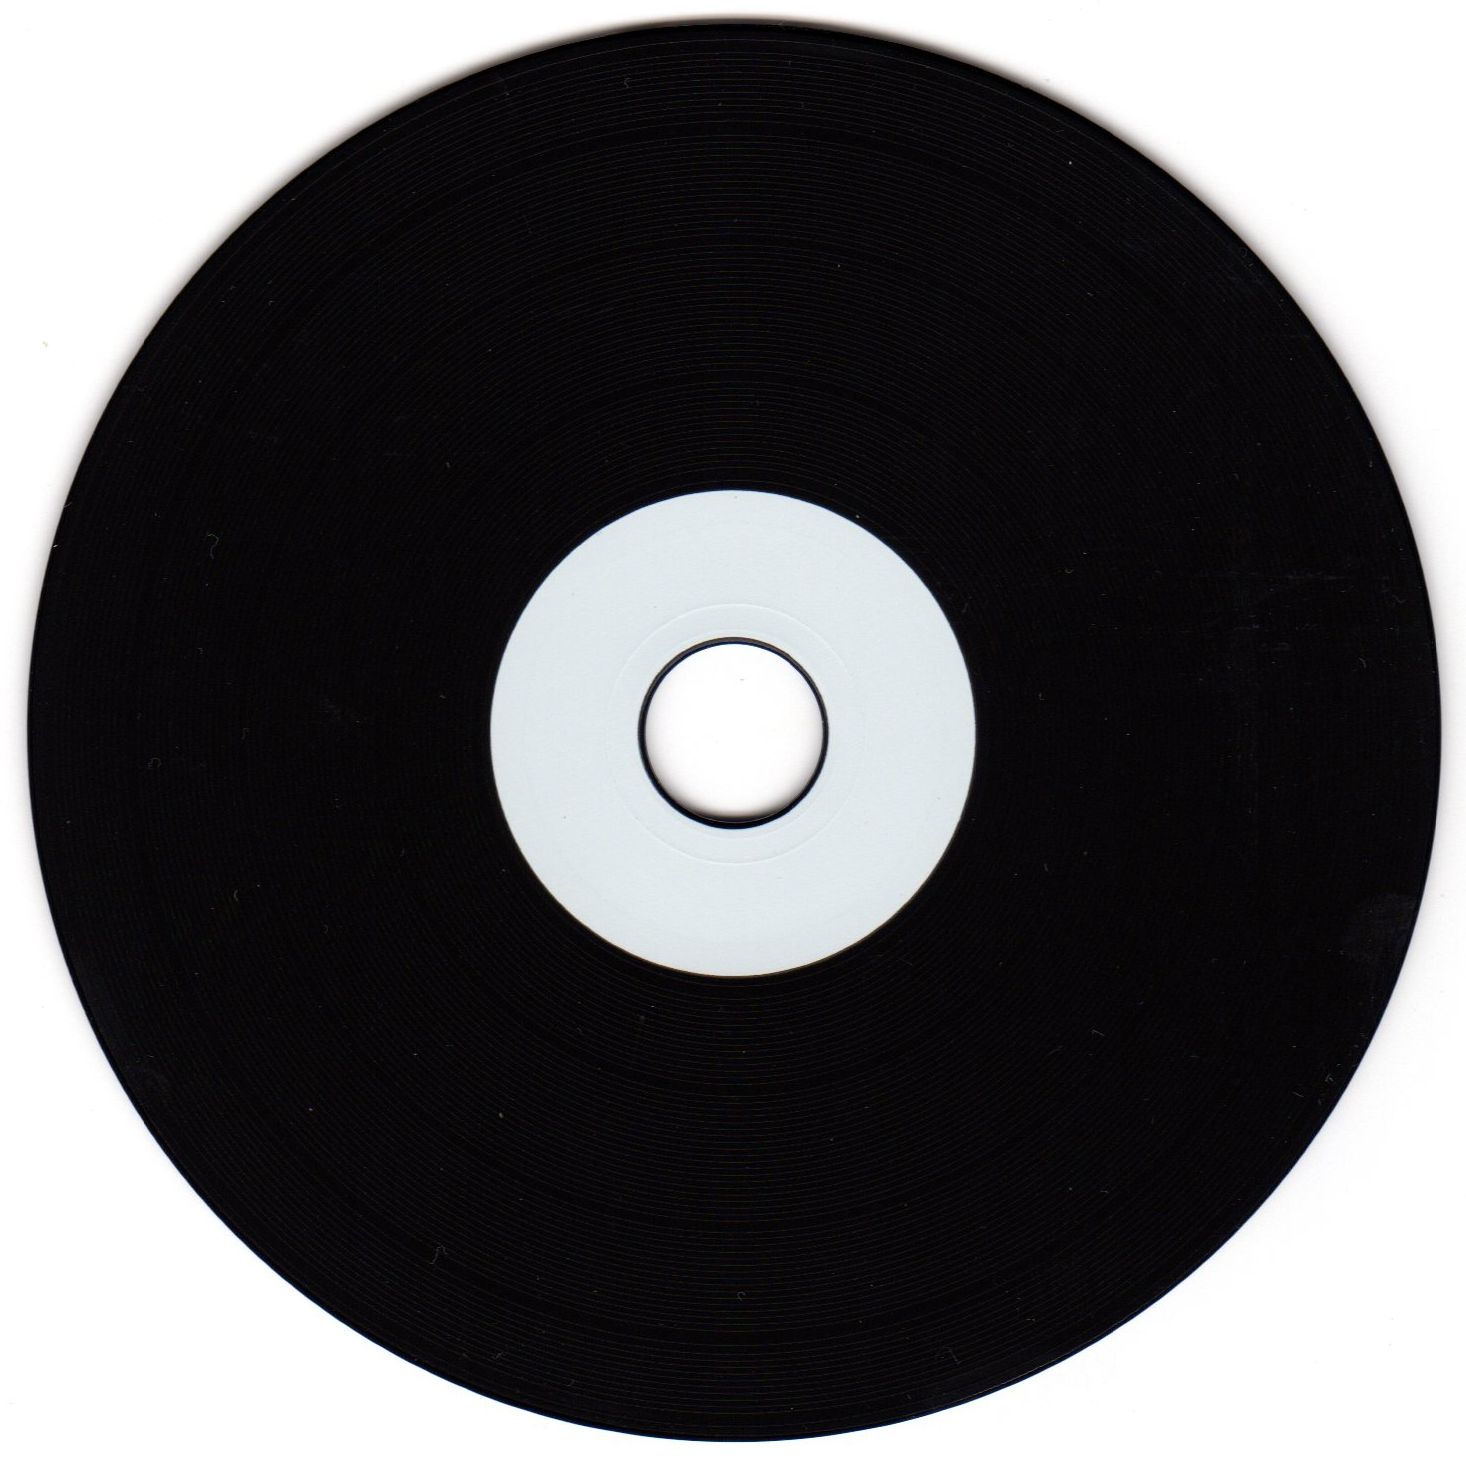 This is the Vinyl CD-R I am talking about... the white section around the inner hub is PRINTABLE with a ink-jet printer.. 41mm Outter <br />It is a ink-jet prinatbale replica of a Vinyl Record... hence needing the outter diameter to be reduced to 41mm